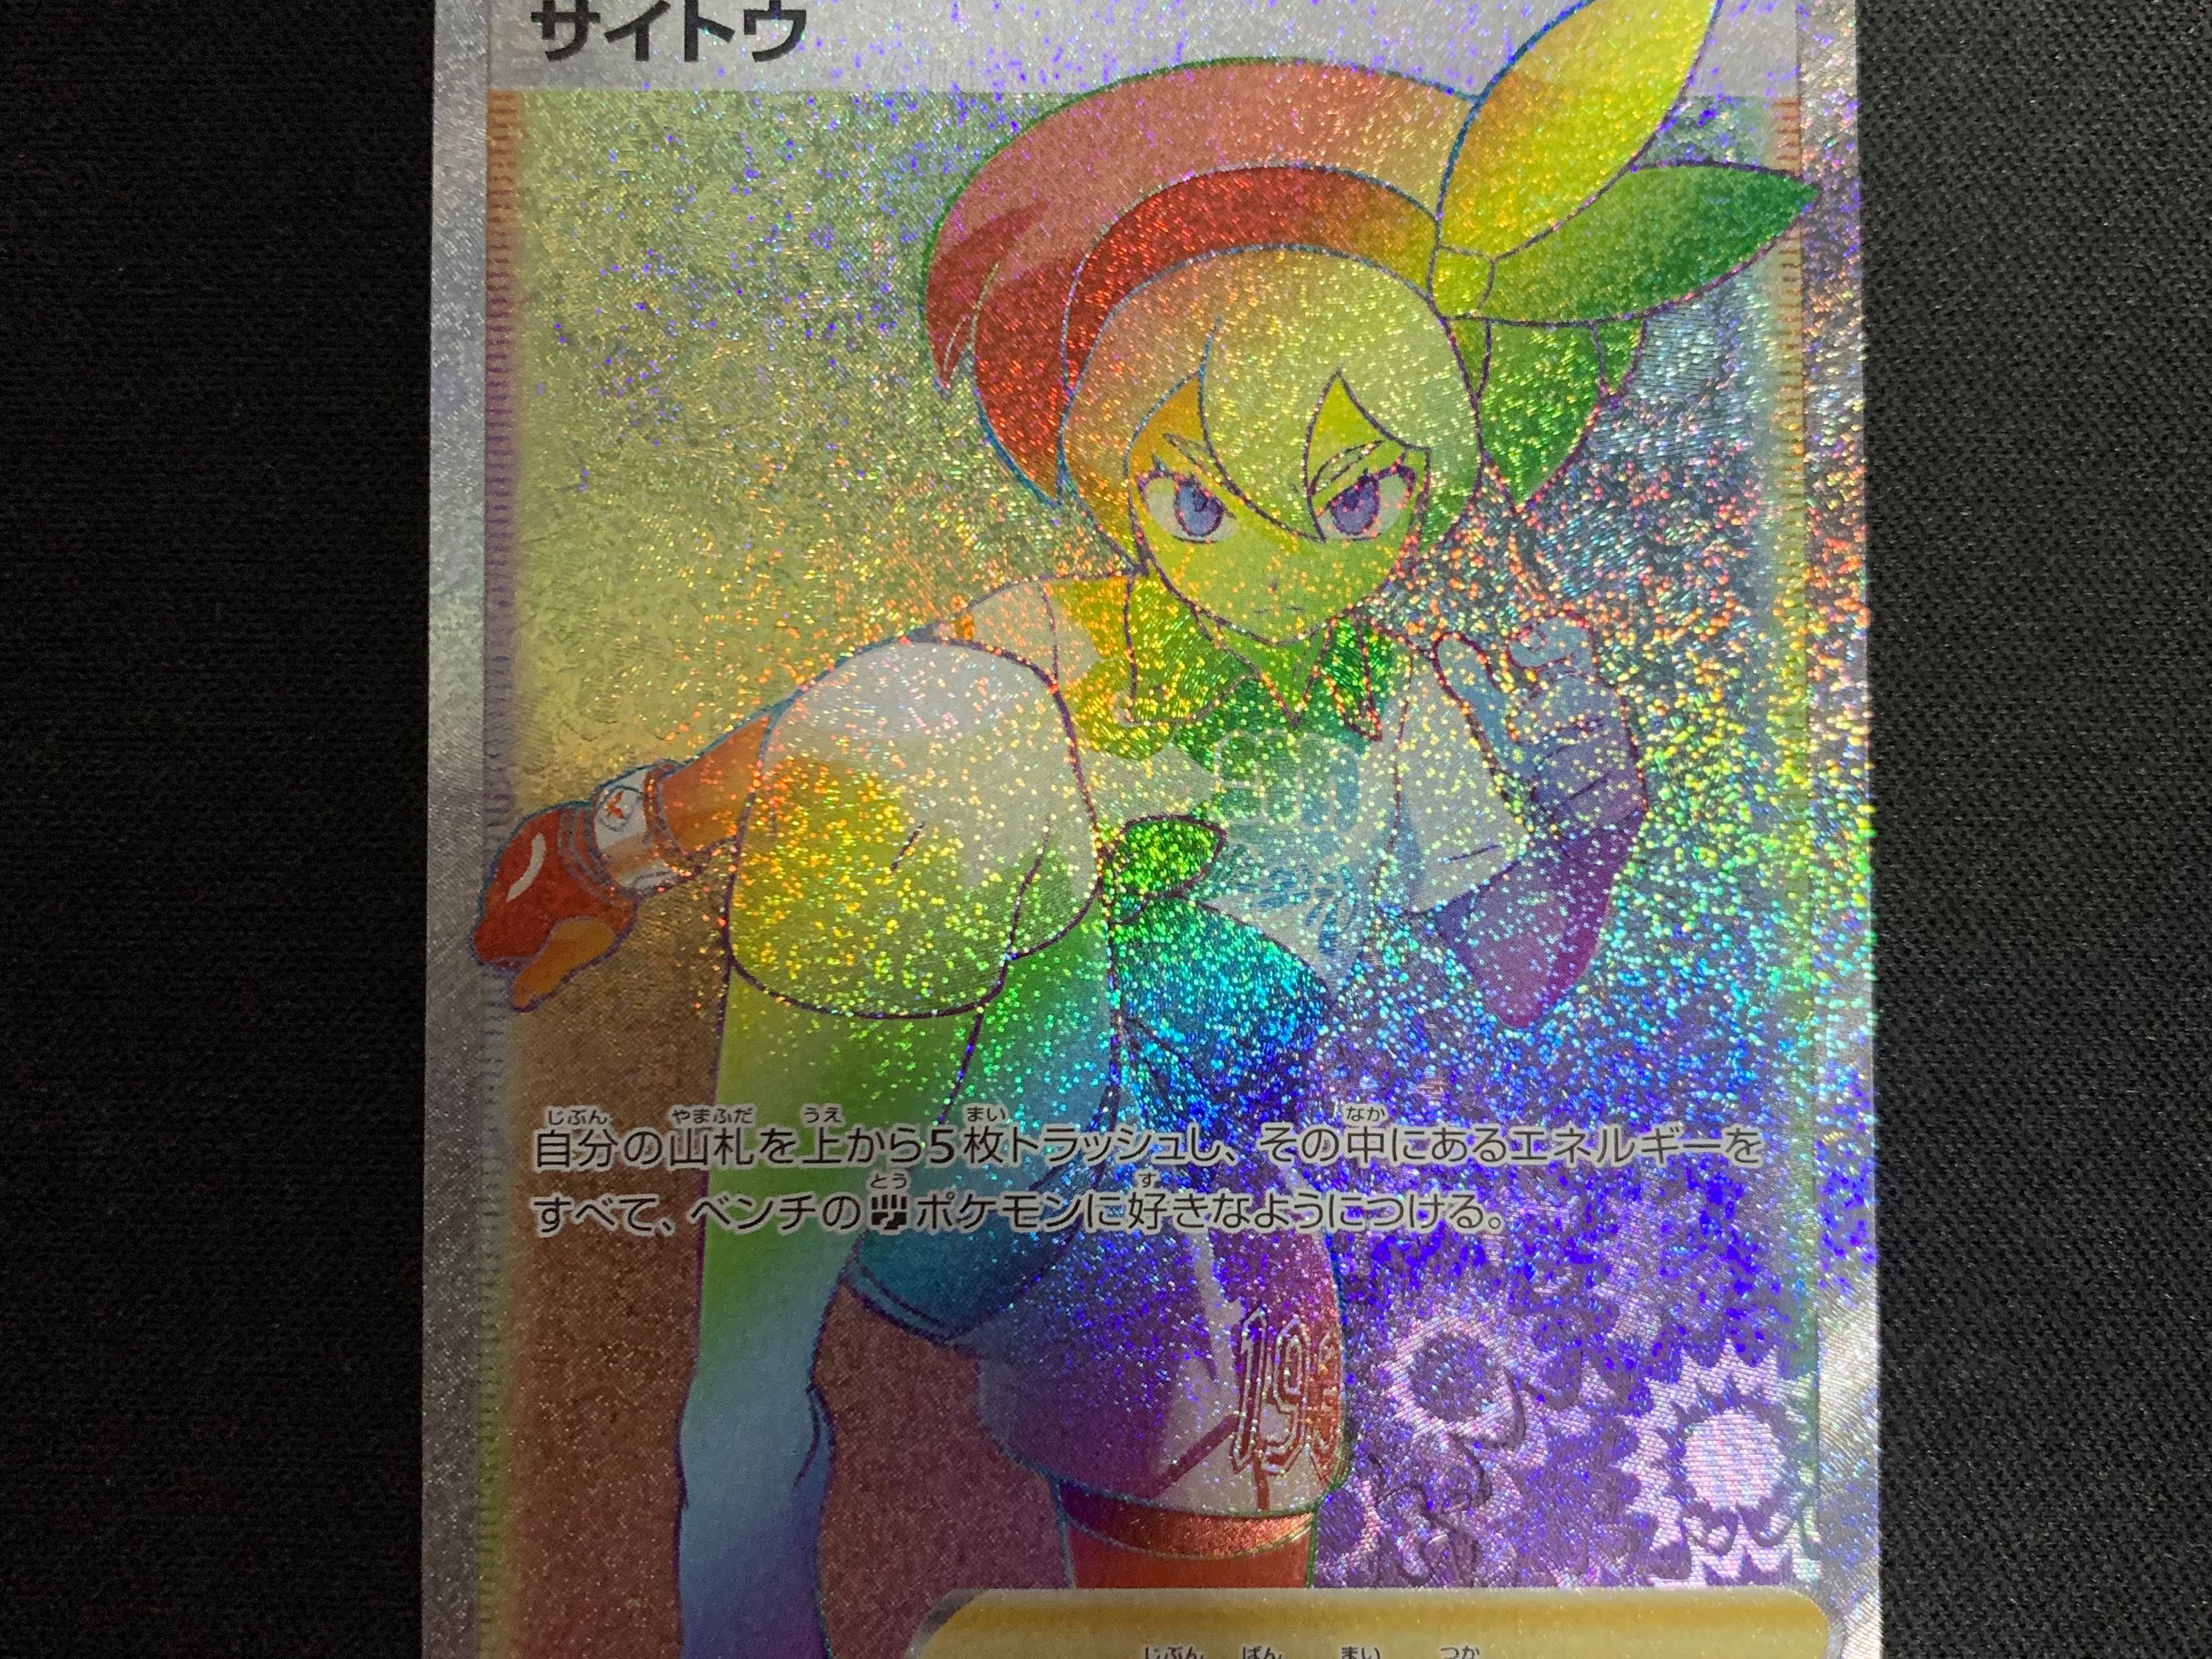 Volo And Hisiuan Voltorb Individual Japanese Pokemon Center Card Sleeves  (X1)